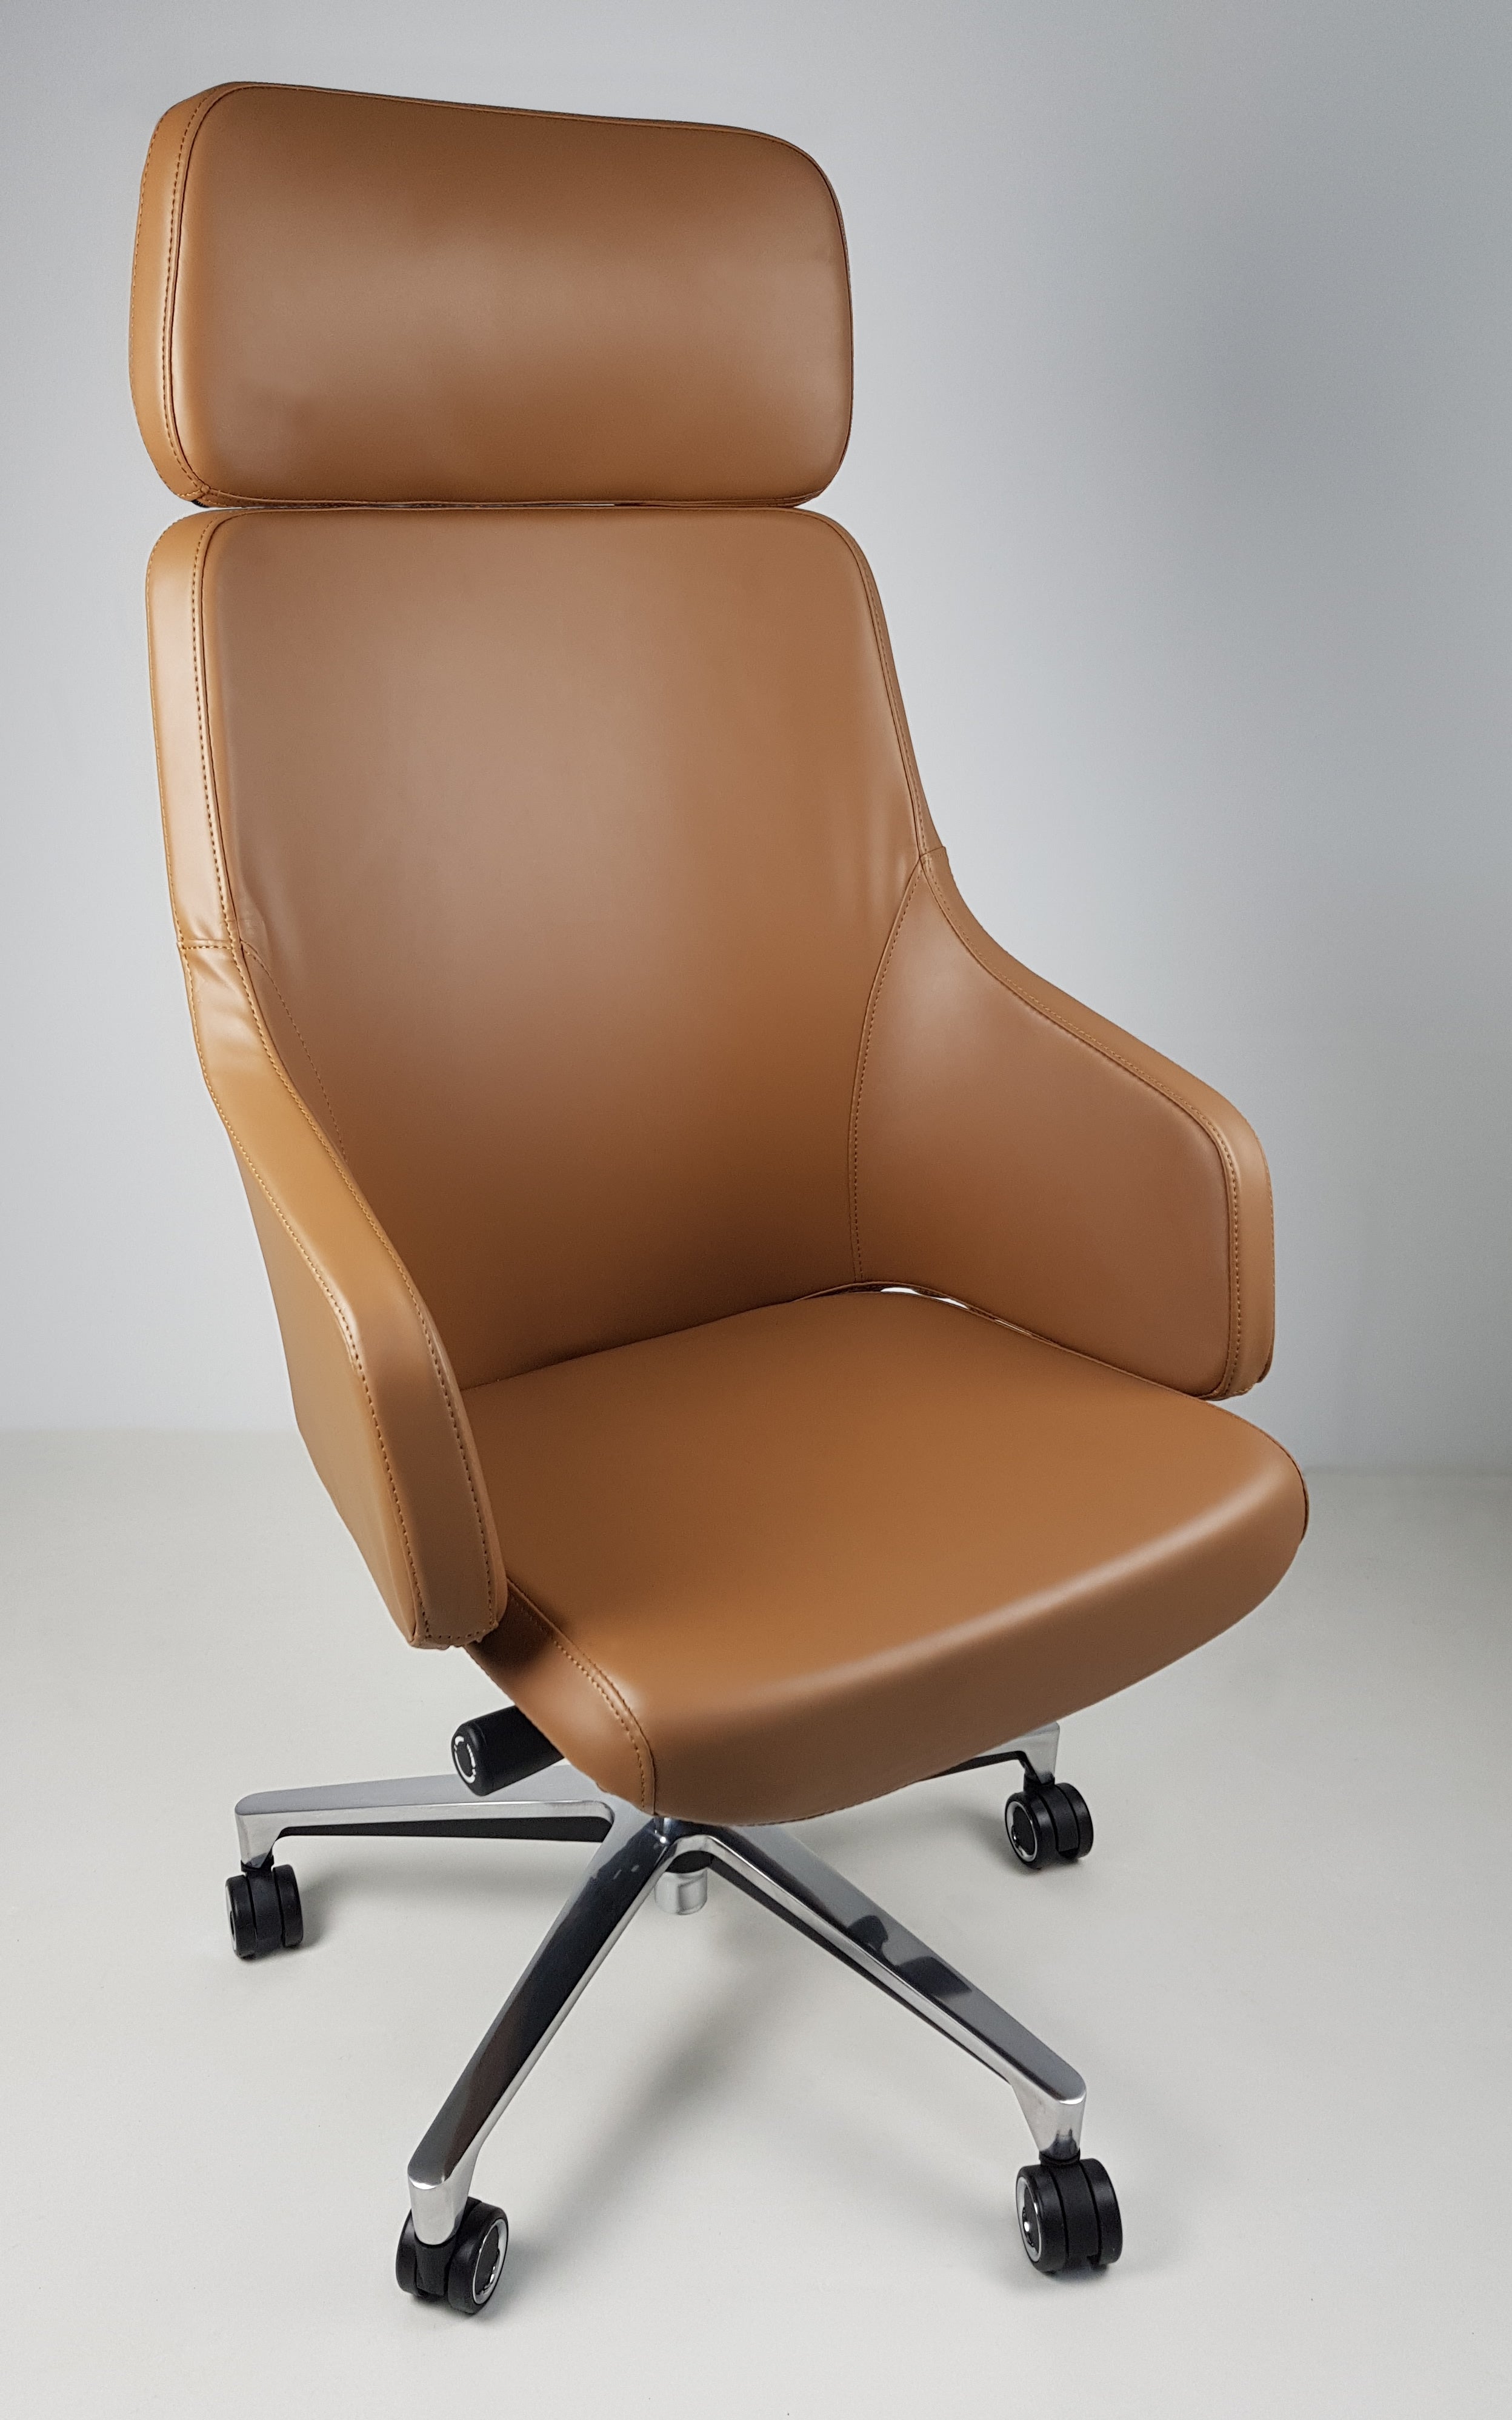 High Back Tan Leather Executive Office Chair with Seat Slide - CHA-1823A Huddersfield